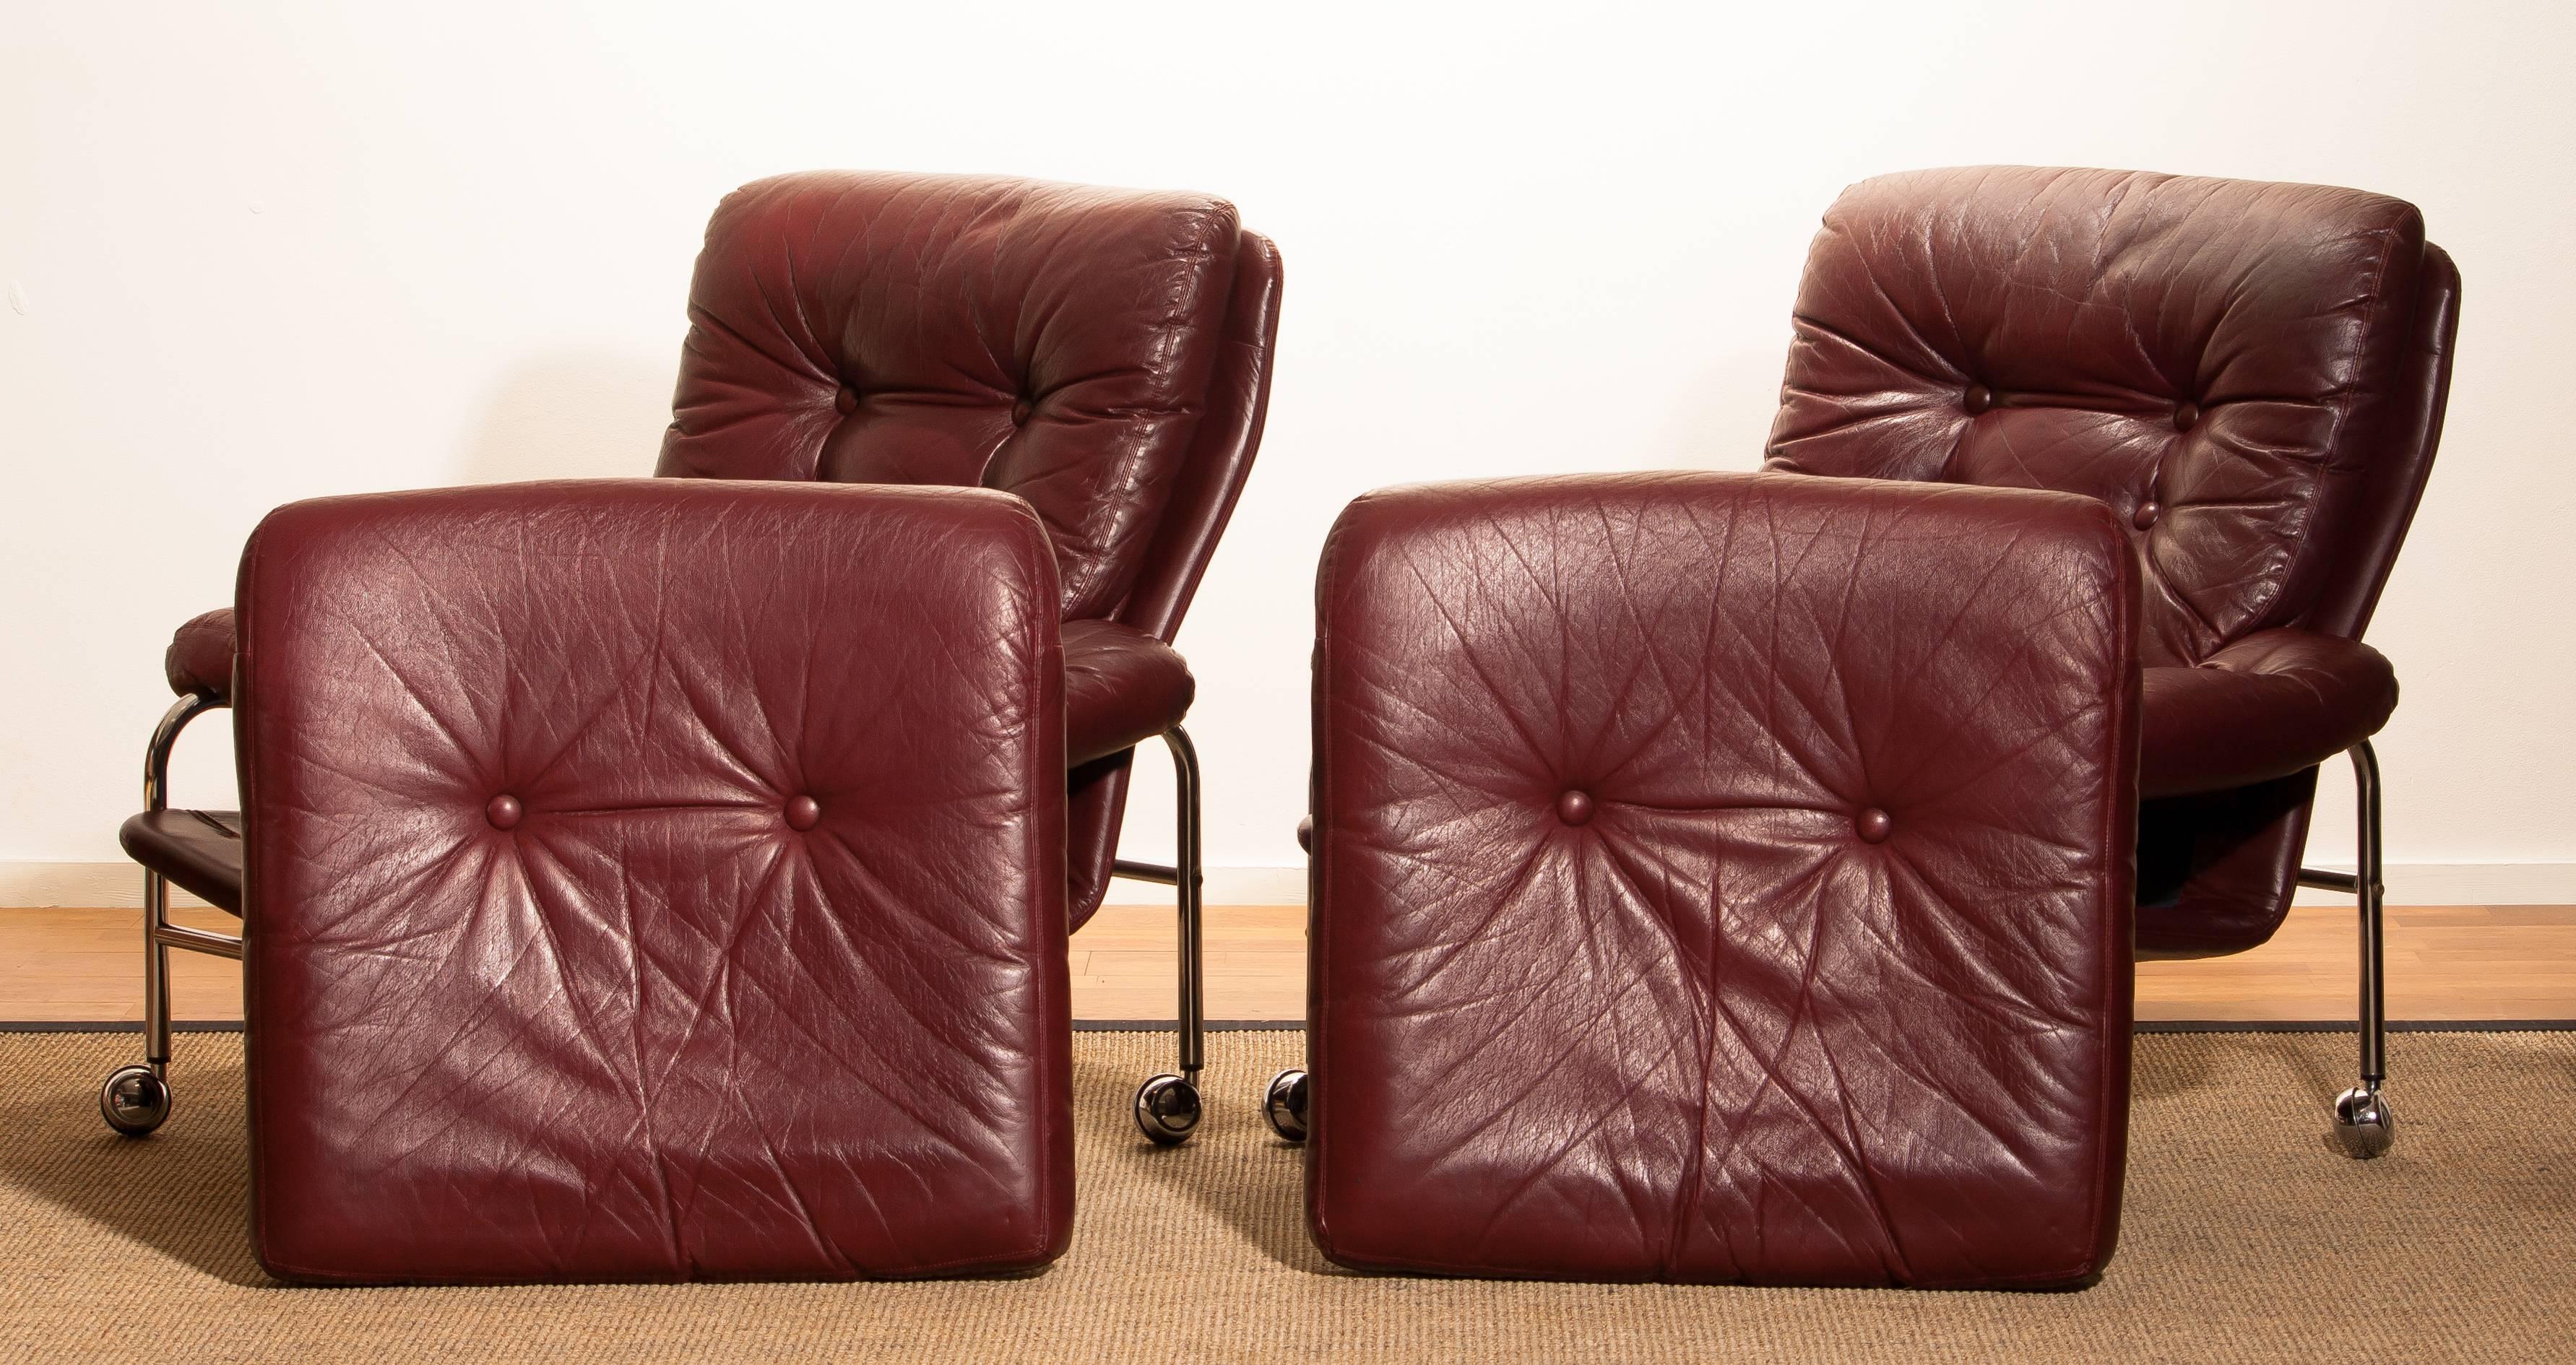 Chrome and Oxen Blood Red Leather Easy / Lounge Chairs by Scapa Rydaholm, Sweden 1